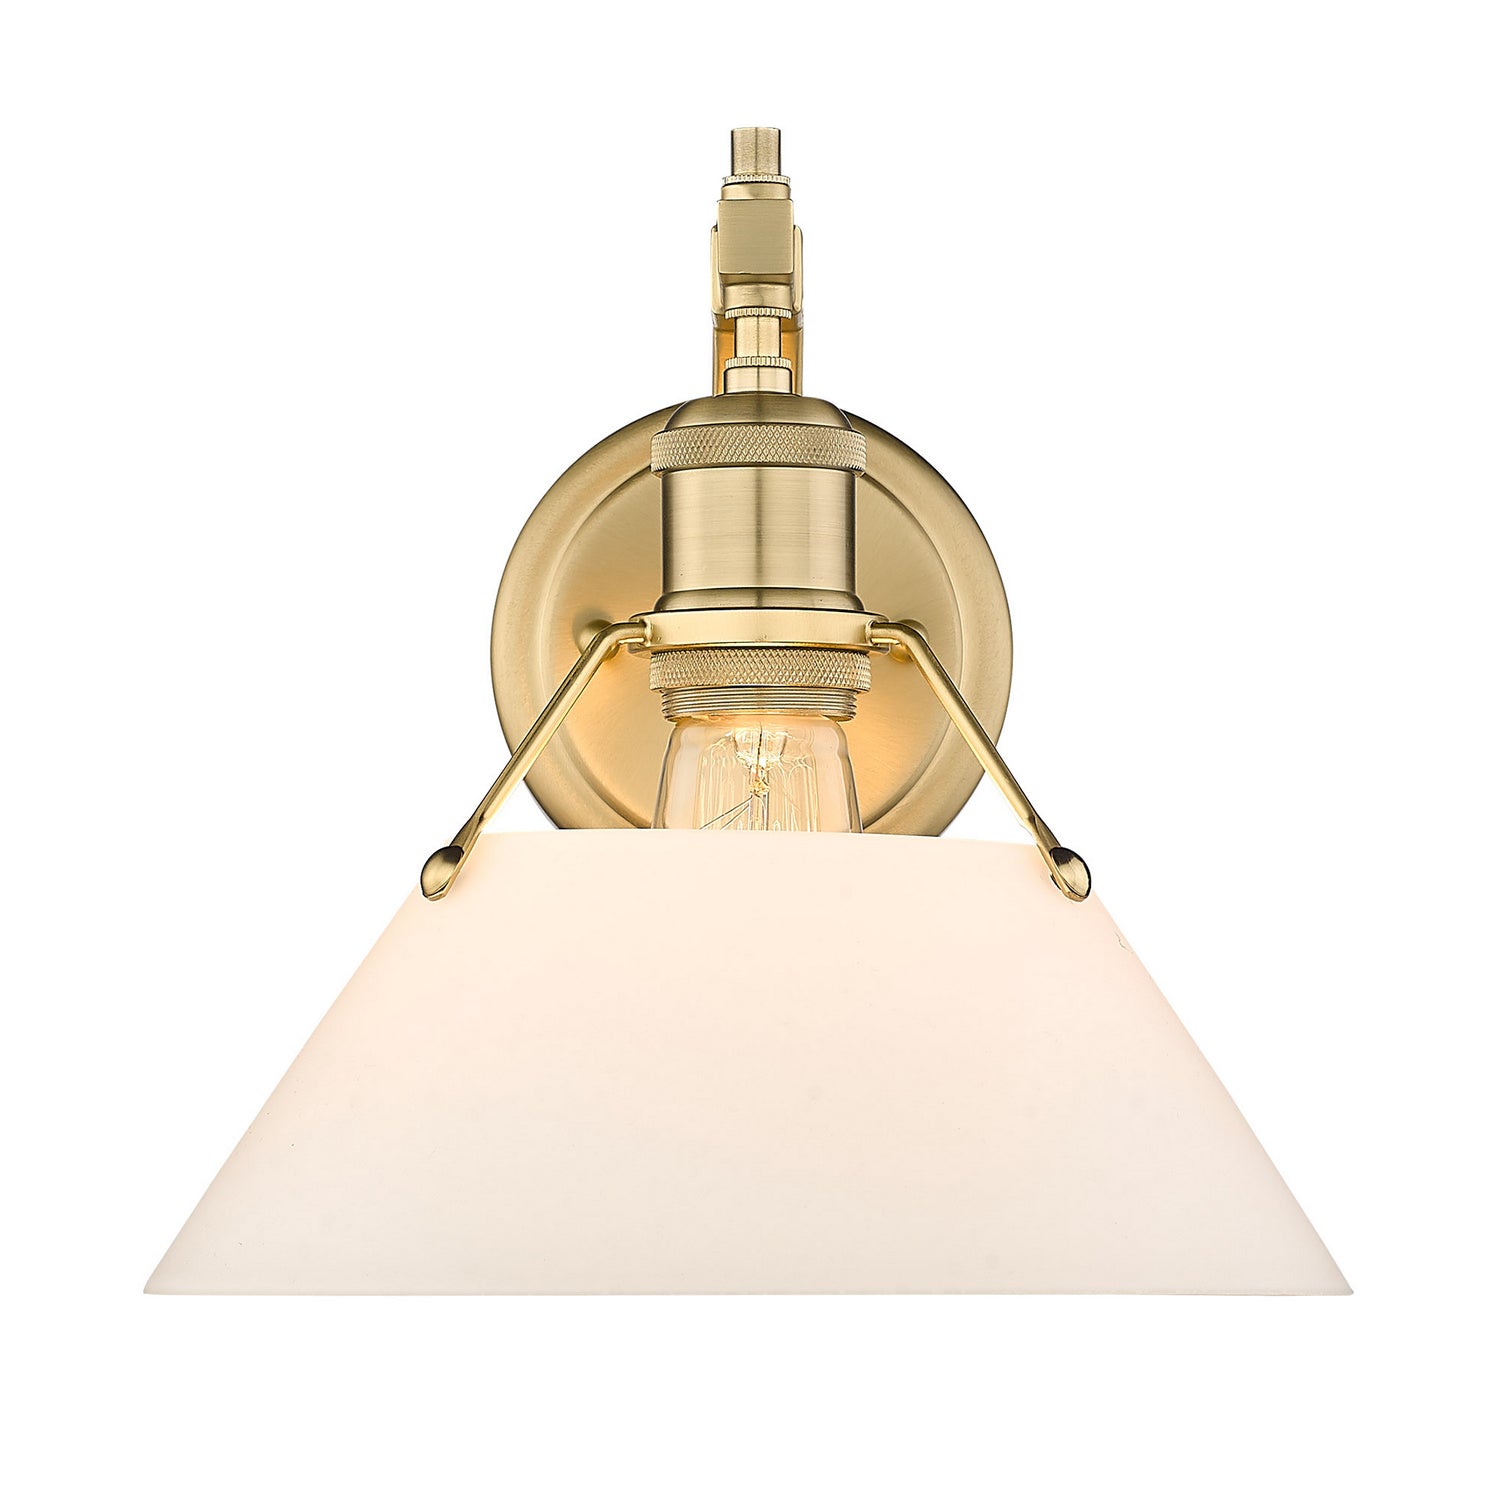 Golden - 3306-1W BCB-OP - One Light Wall Sconce - Orwell BCB - Brushed Champagne Bronze